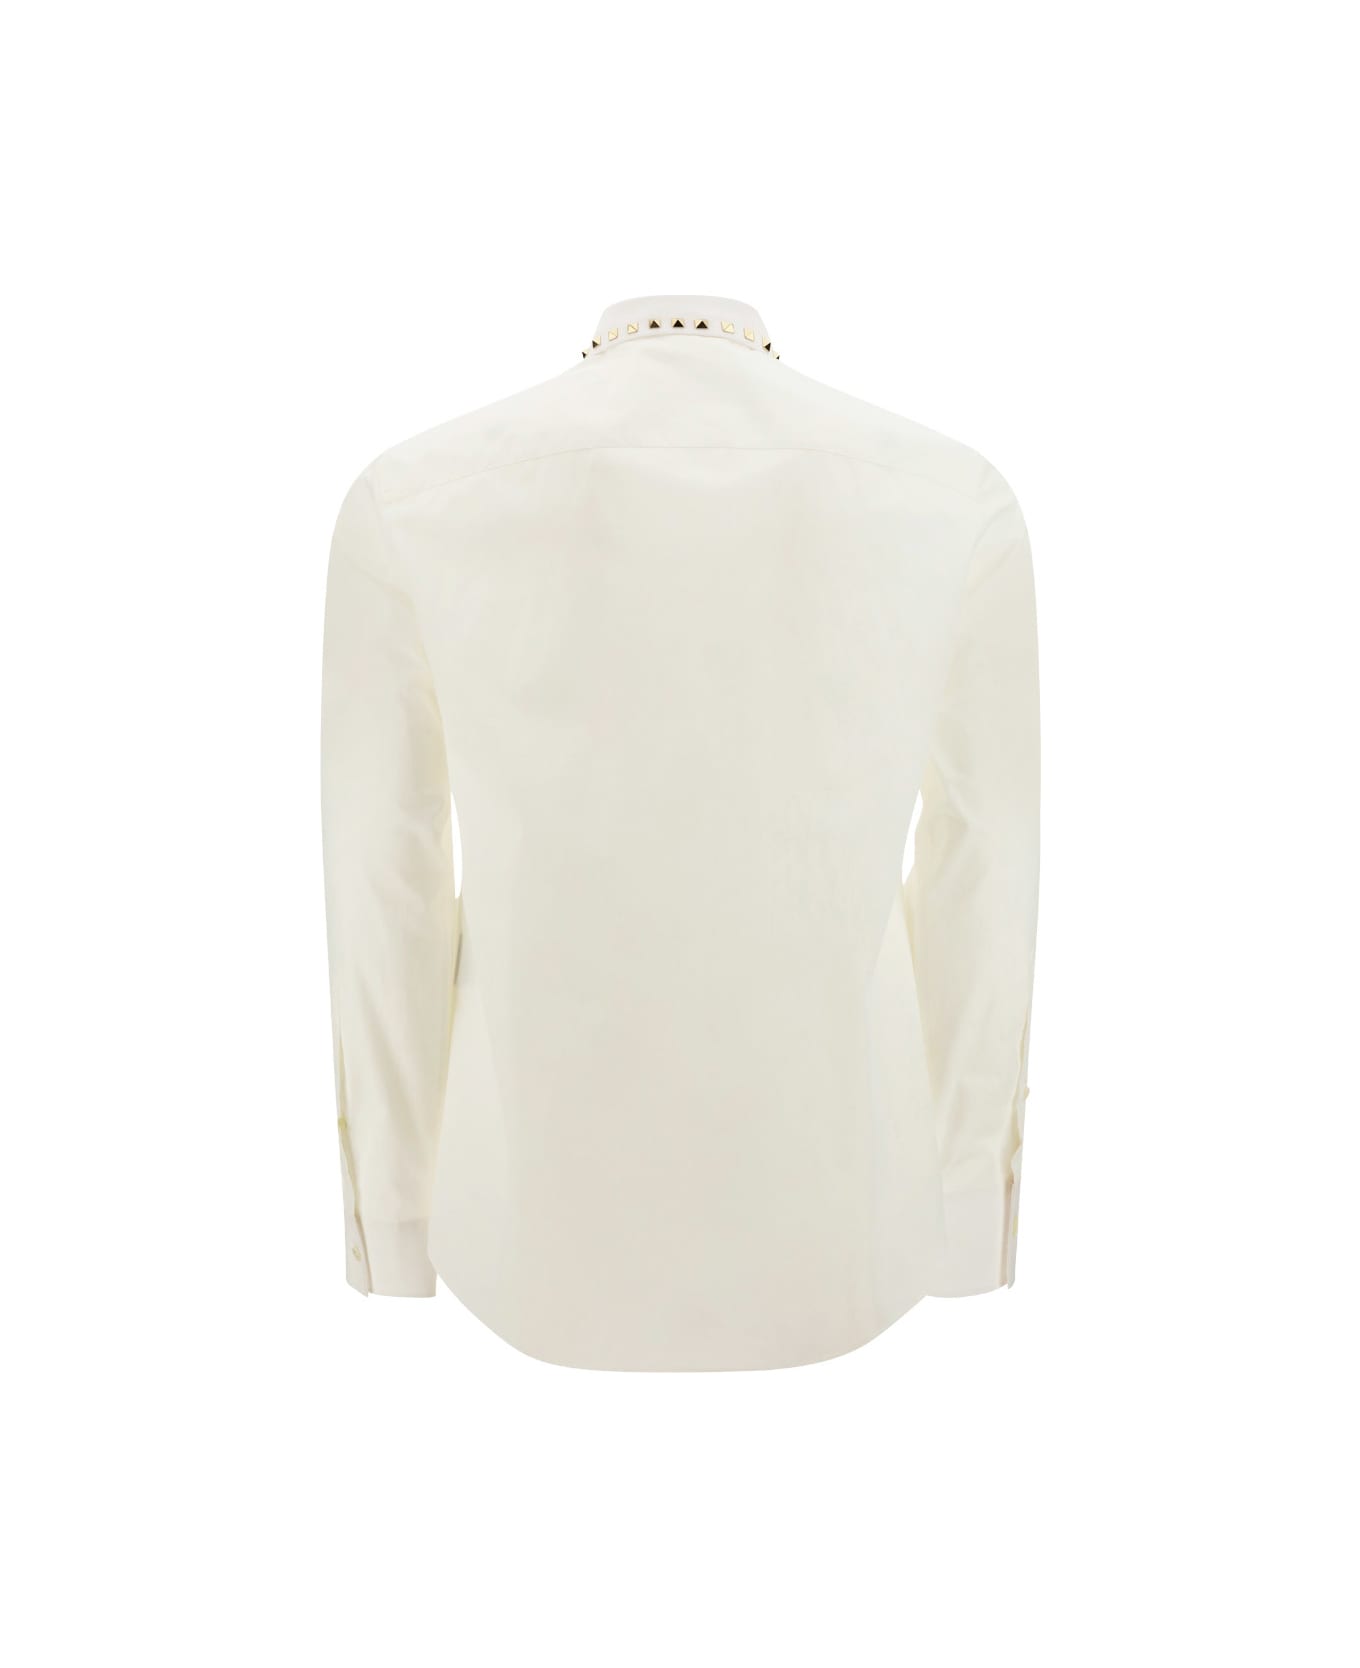 Valentino White Shirt With Studs On The Collar - White